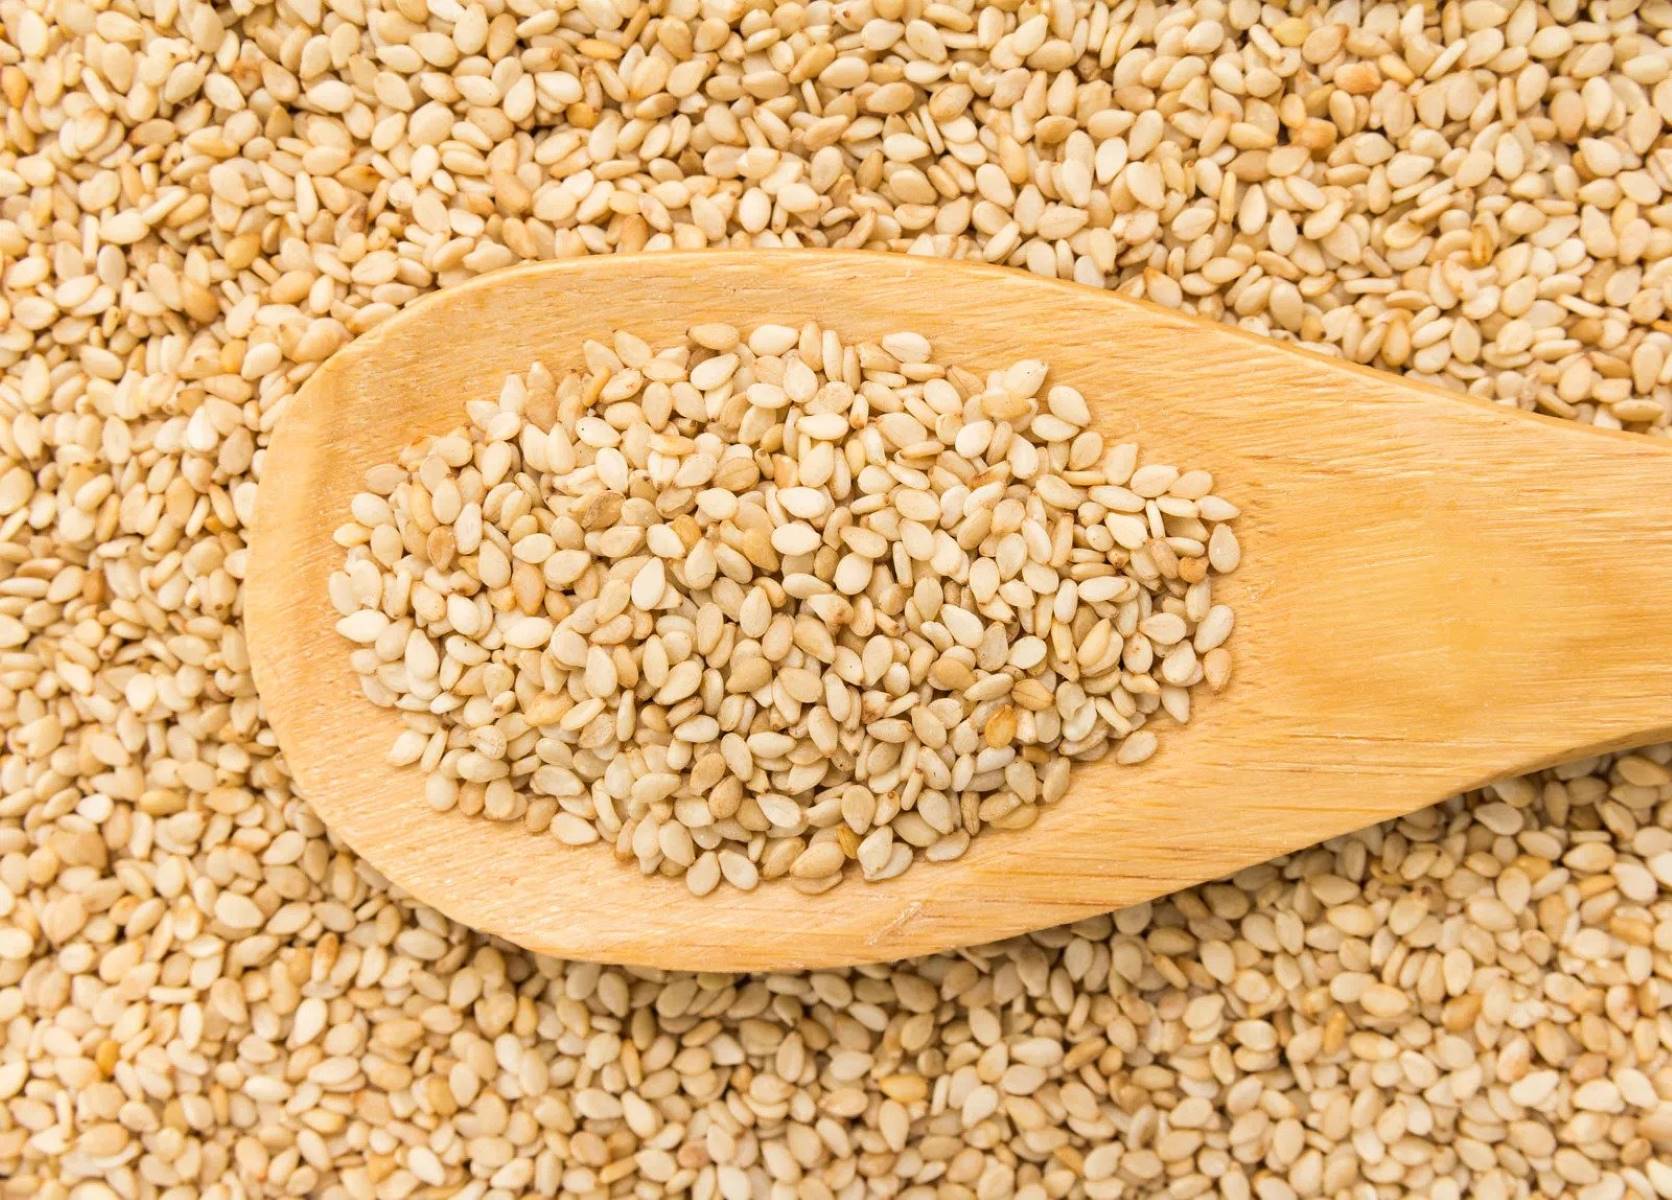 How To Store Sesame Seeds